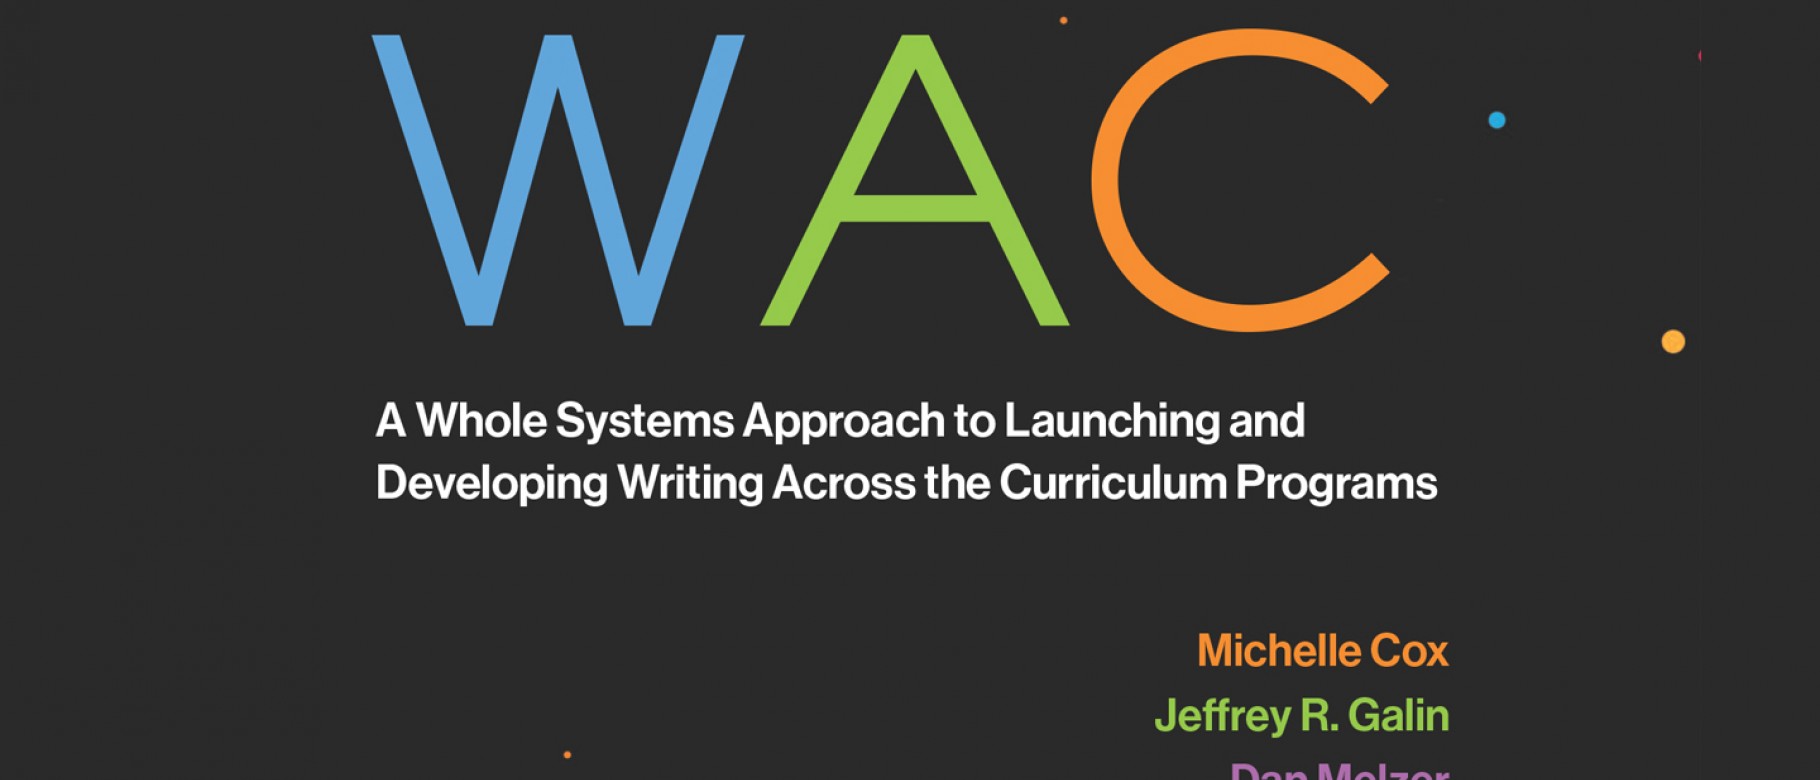 Sustainable WAC: A Whole-Systems Approach to Launching and Developing Writing Across the Curriculum Programs by Michelle Cox, Je